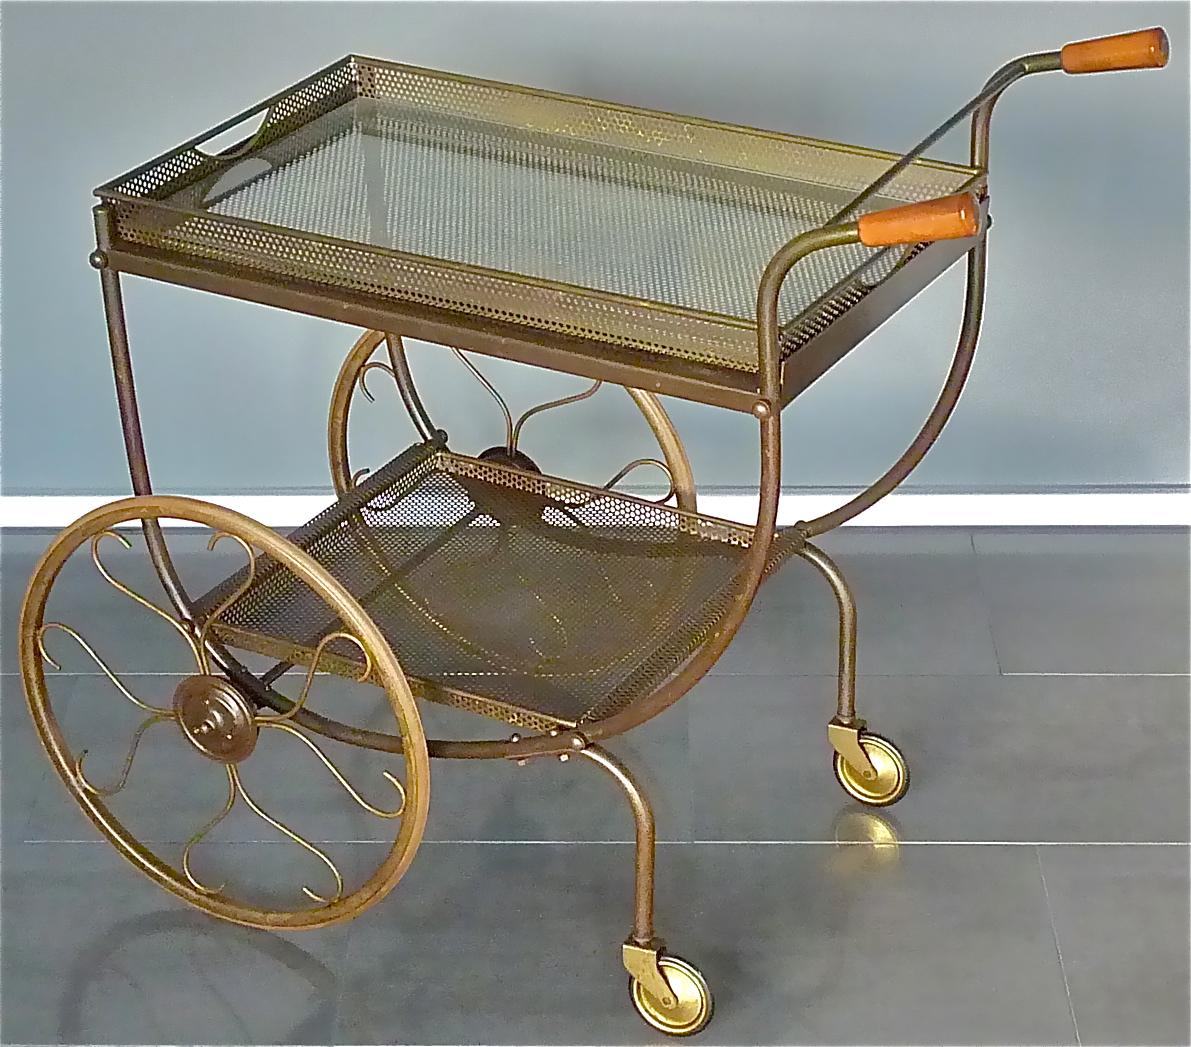 Early midcentury and beautiful patinated brass bar cart or drinks trolley designed by Josef Frank and executed by Svenskt Tenn, Sweden around 1940s to 1950s. The fantastic Scandinavian bar cart which is made of tubular patinated brass has two wood